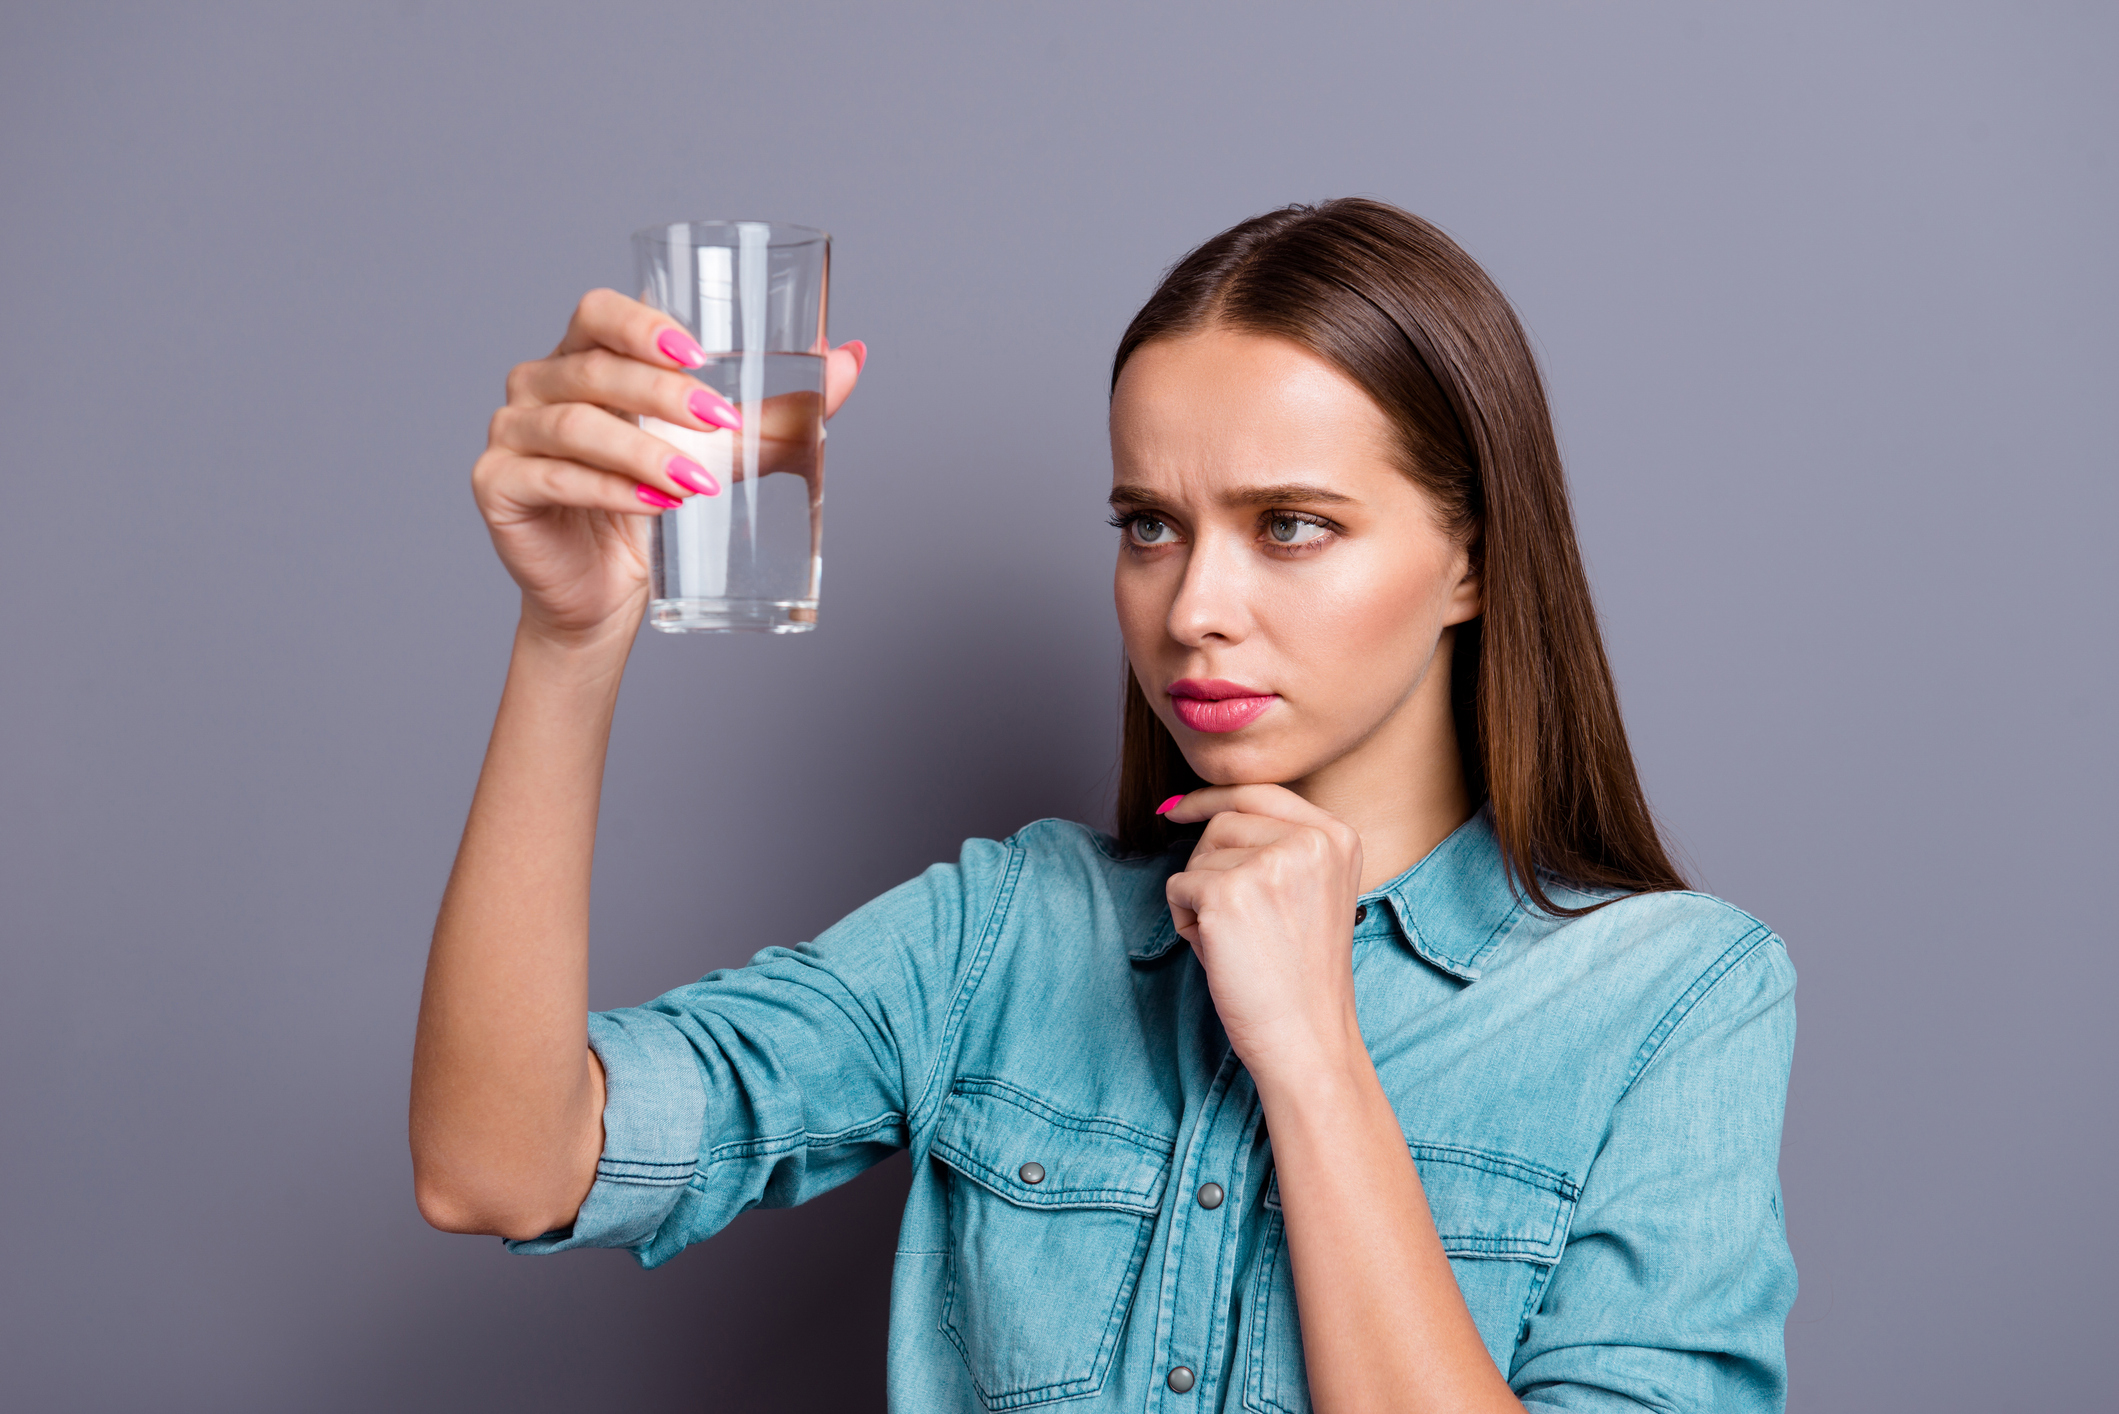 Woman examining a glass of water with a skeptical expression.